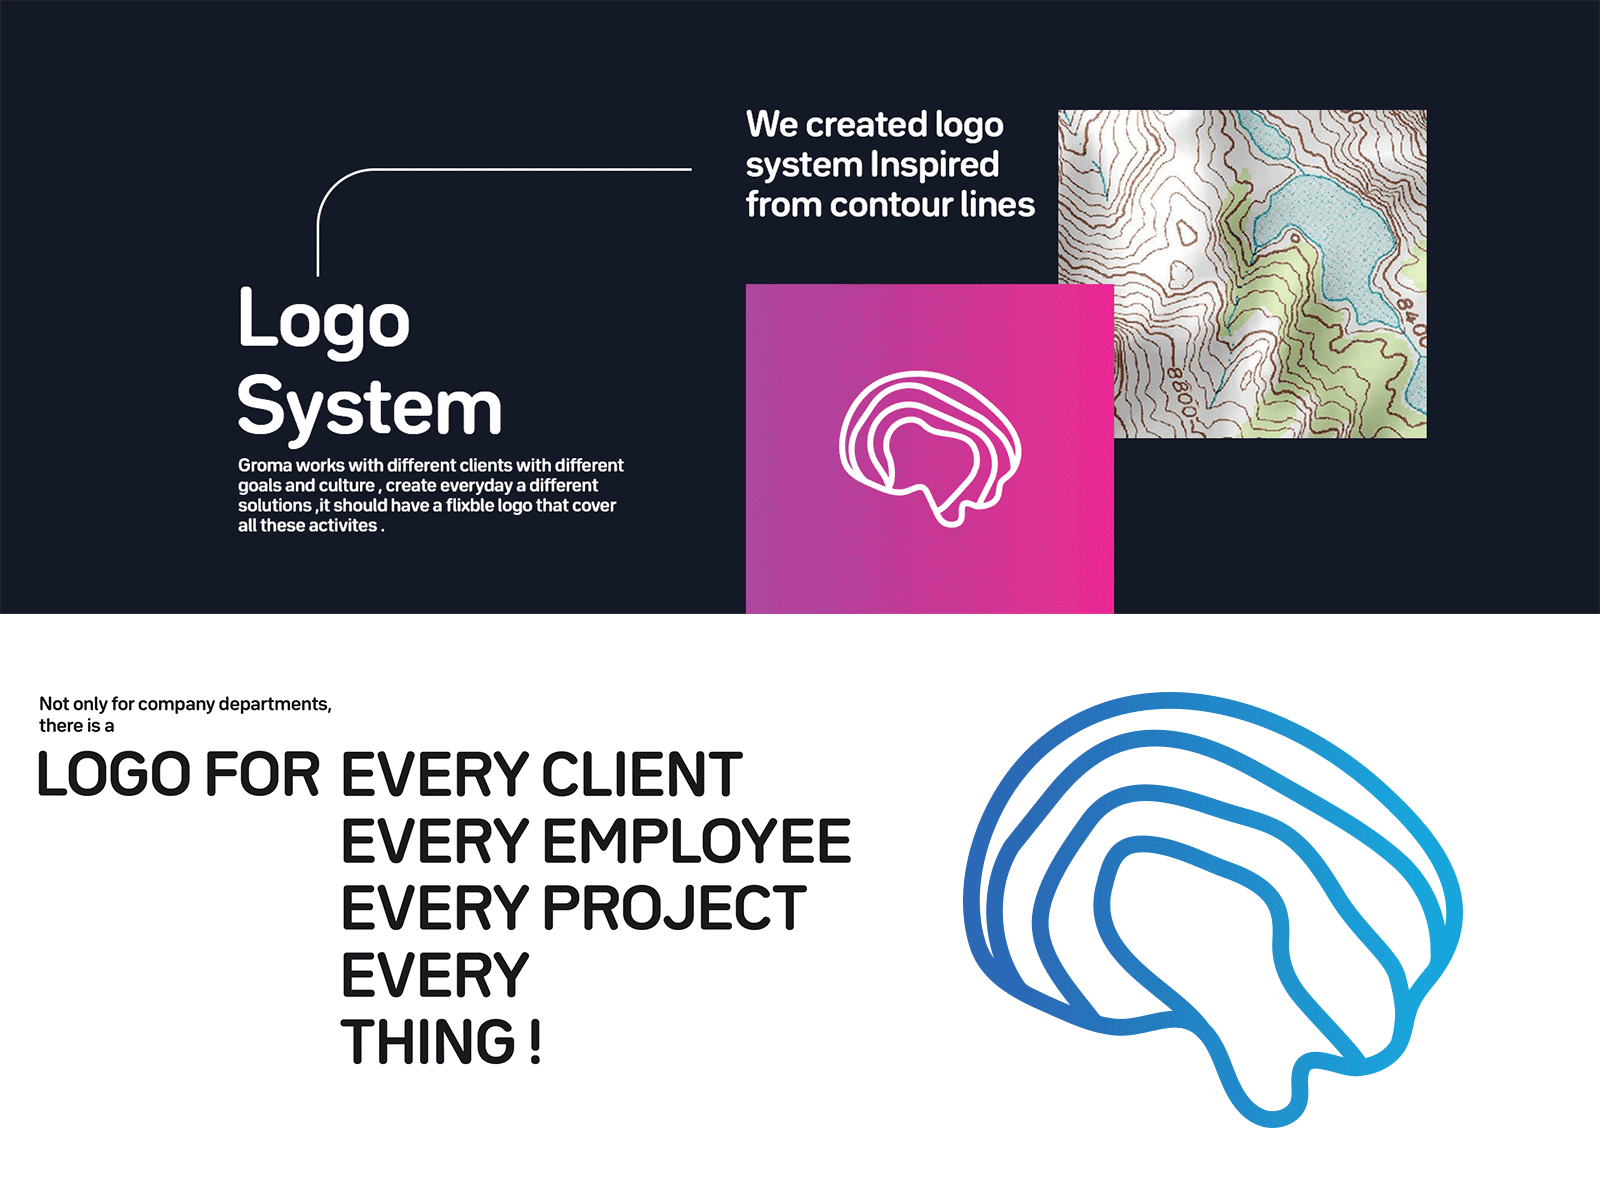 GROMA Business Solutions - Logo system